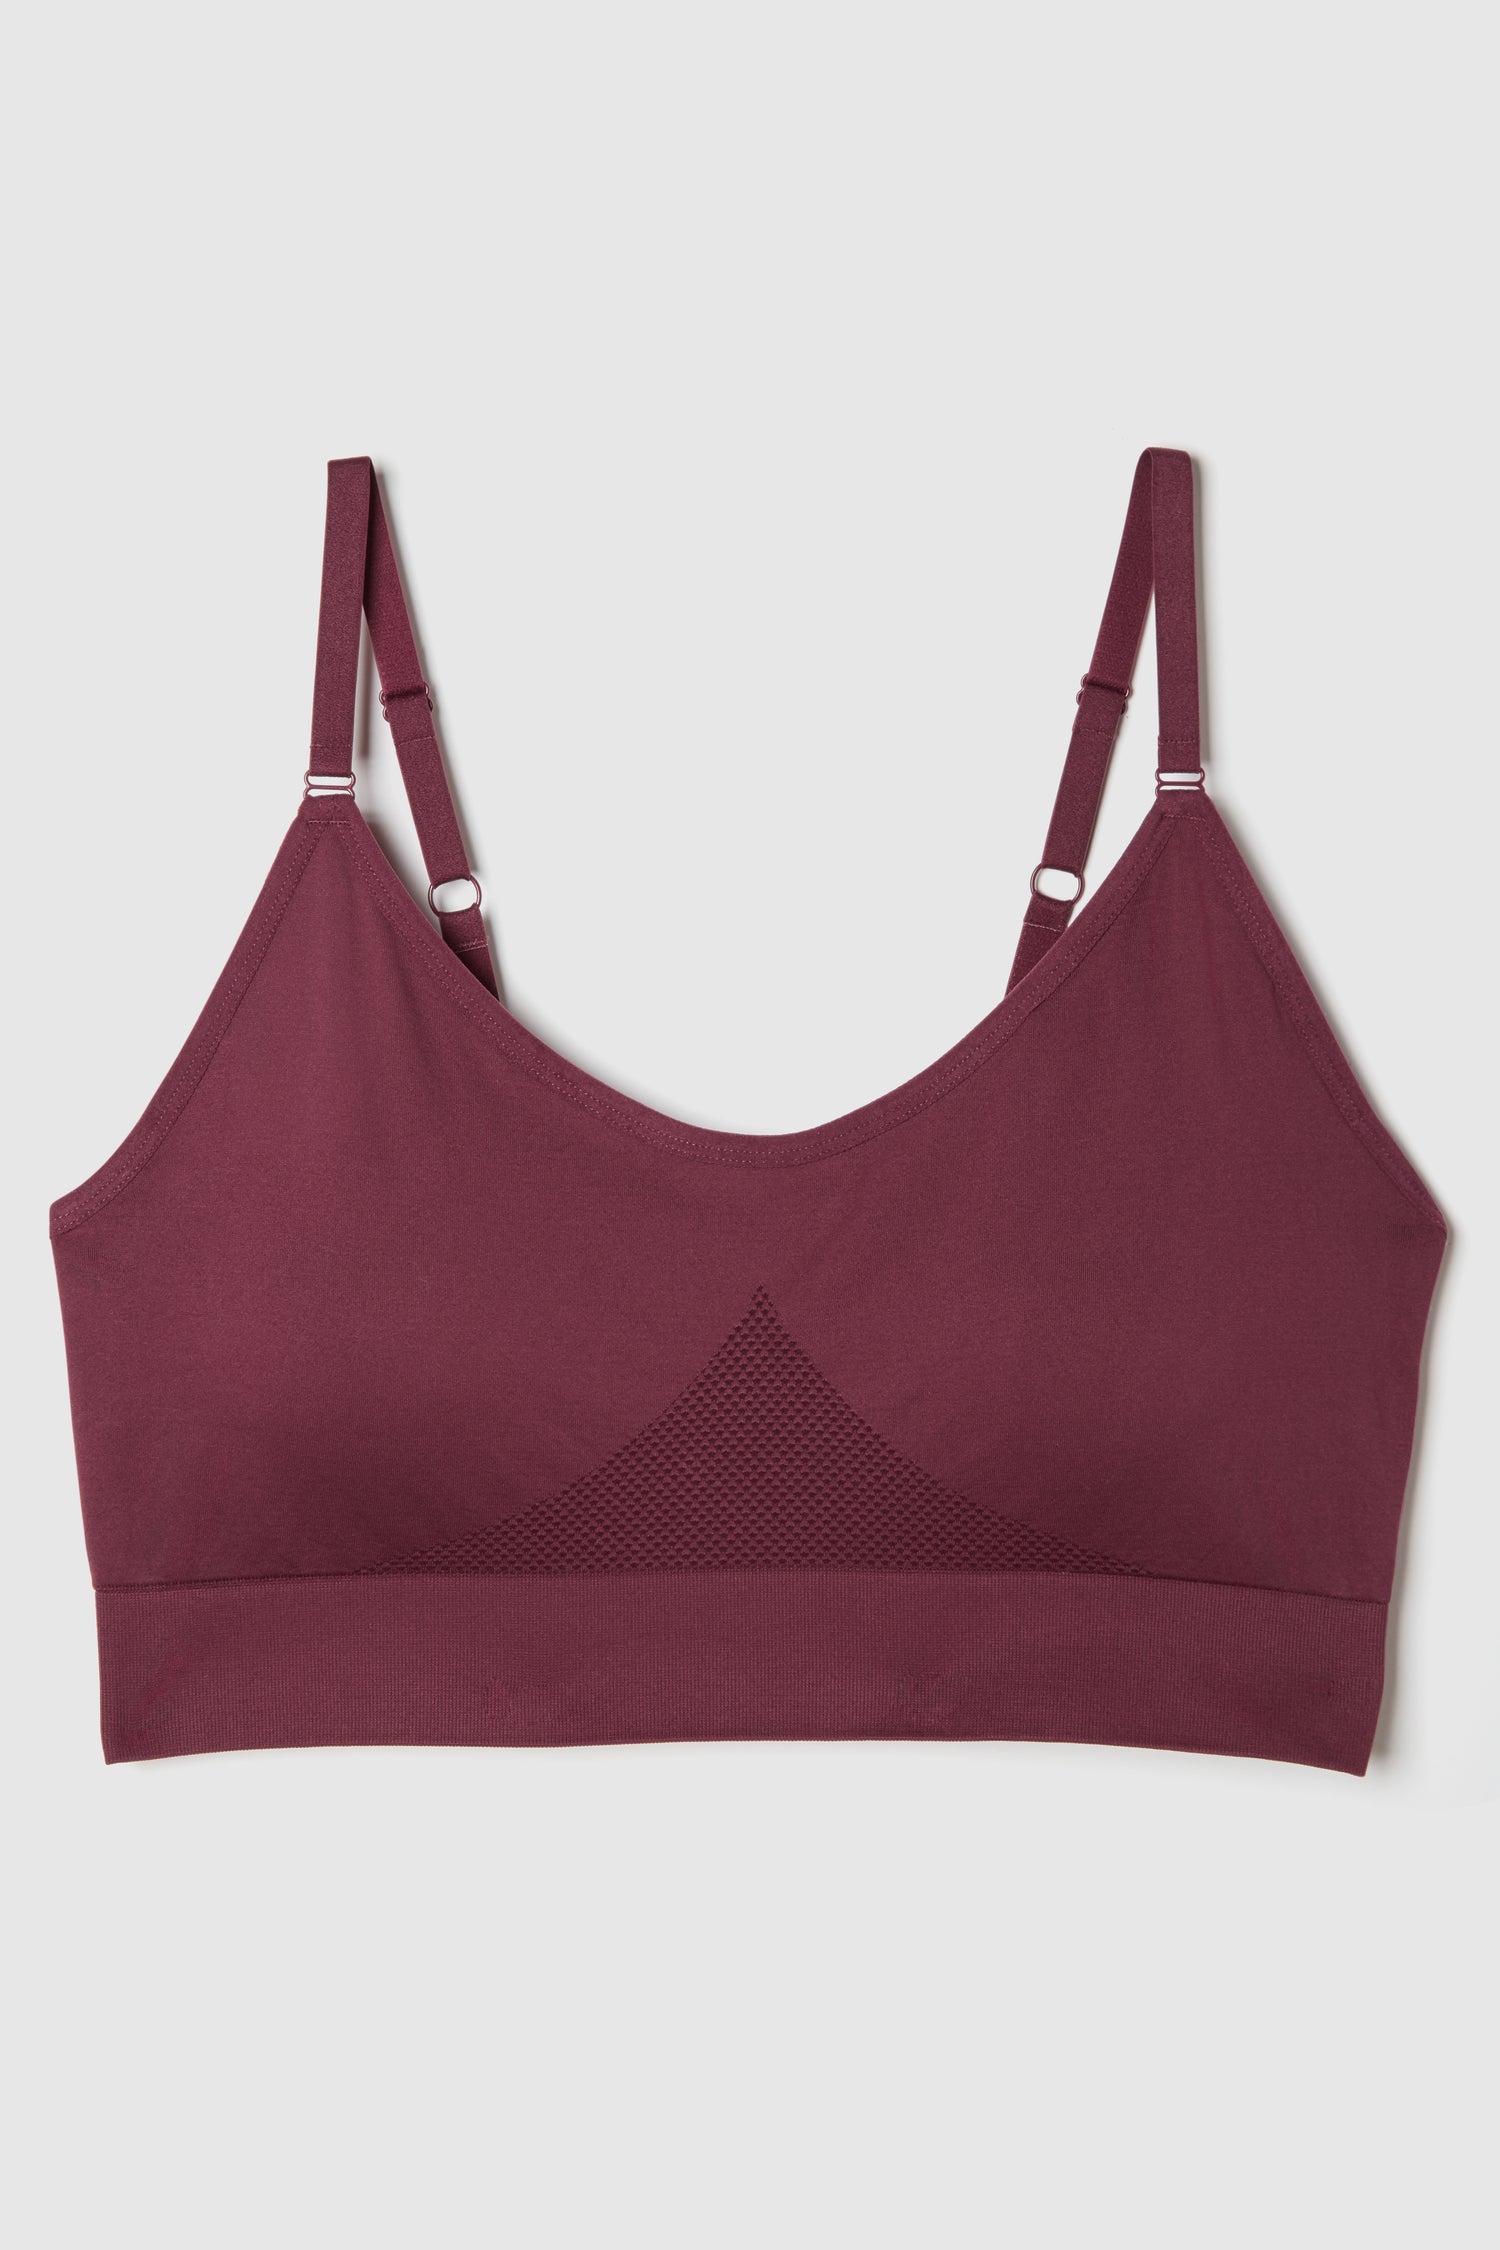 Sports Bras for Women French Front Close Seamless Unlined Large